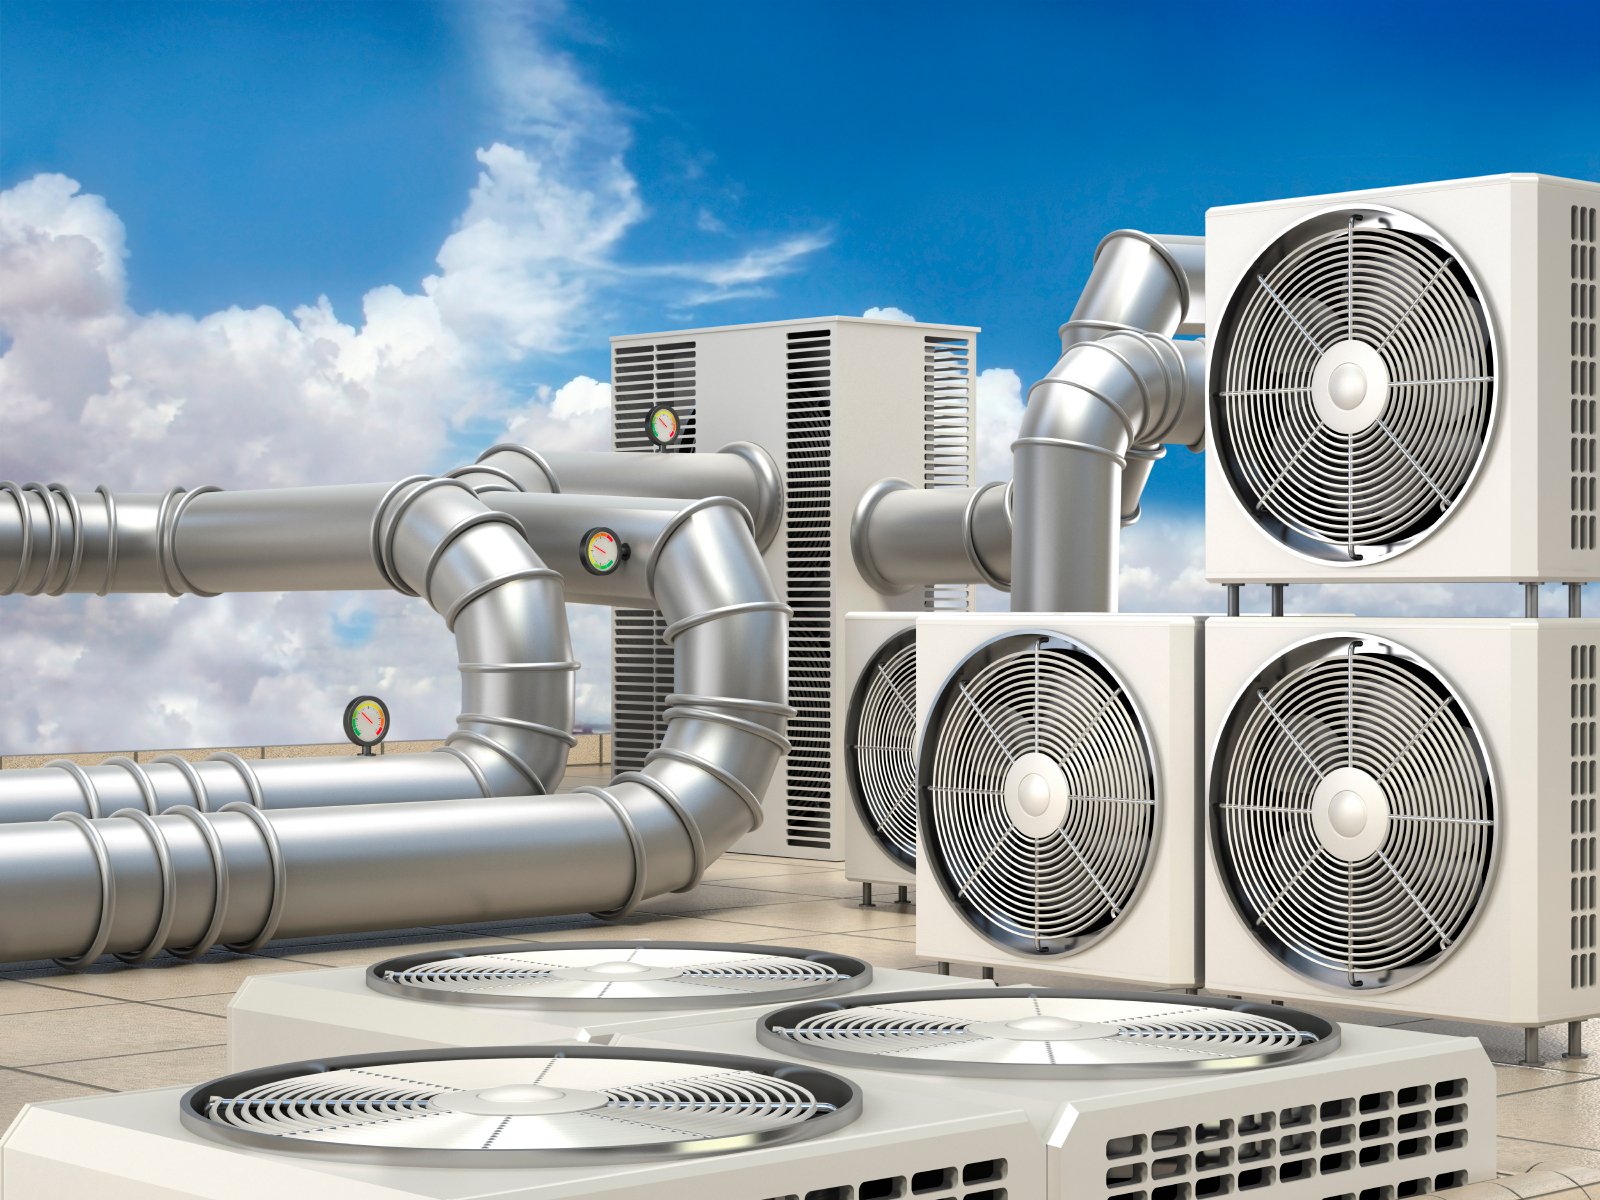 Image Of Hvac Equipment Ventilation And Air